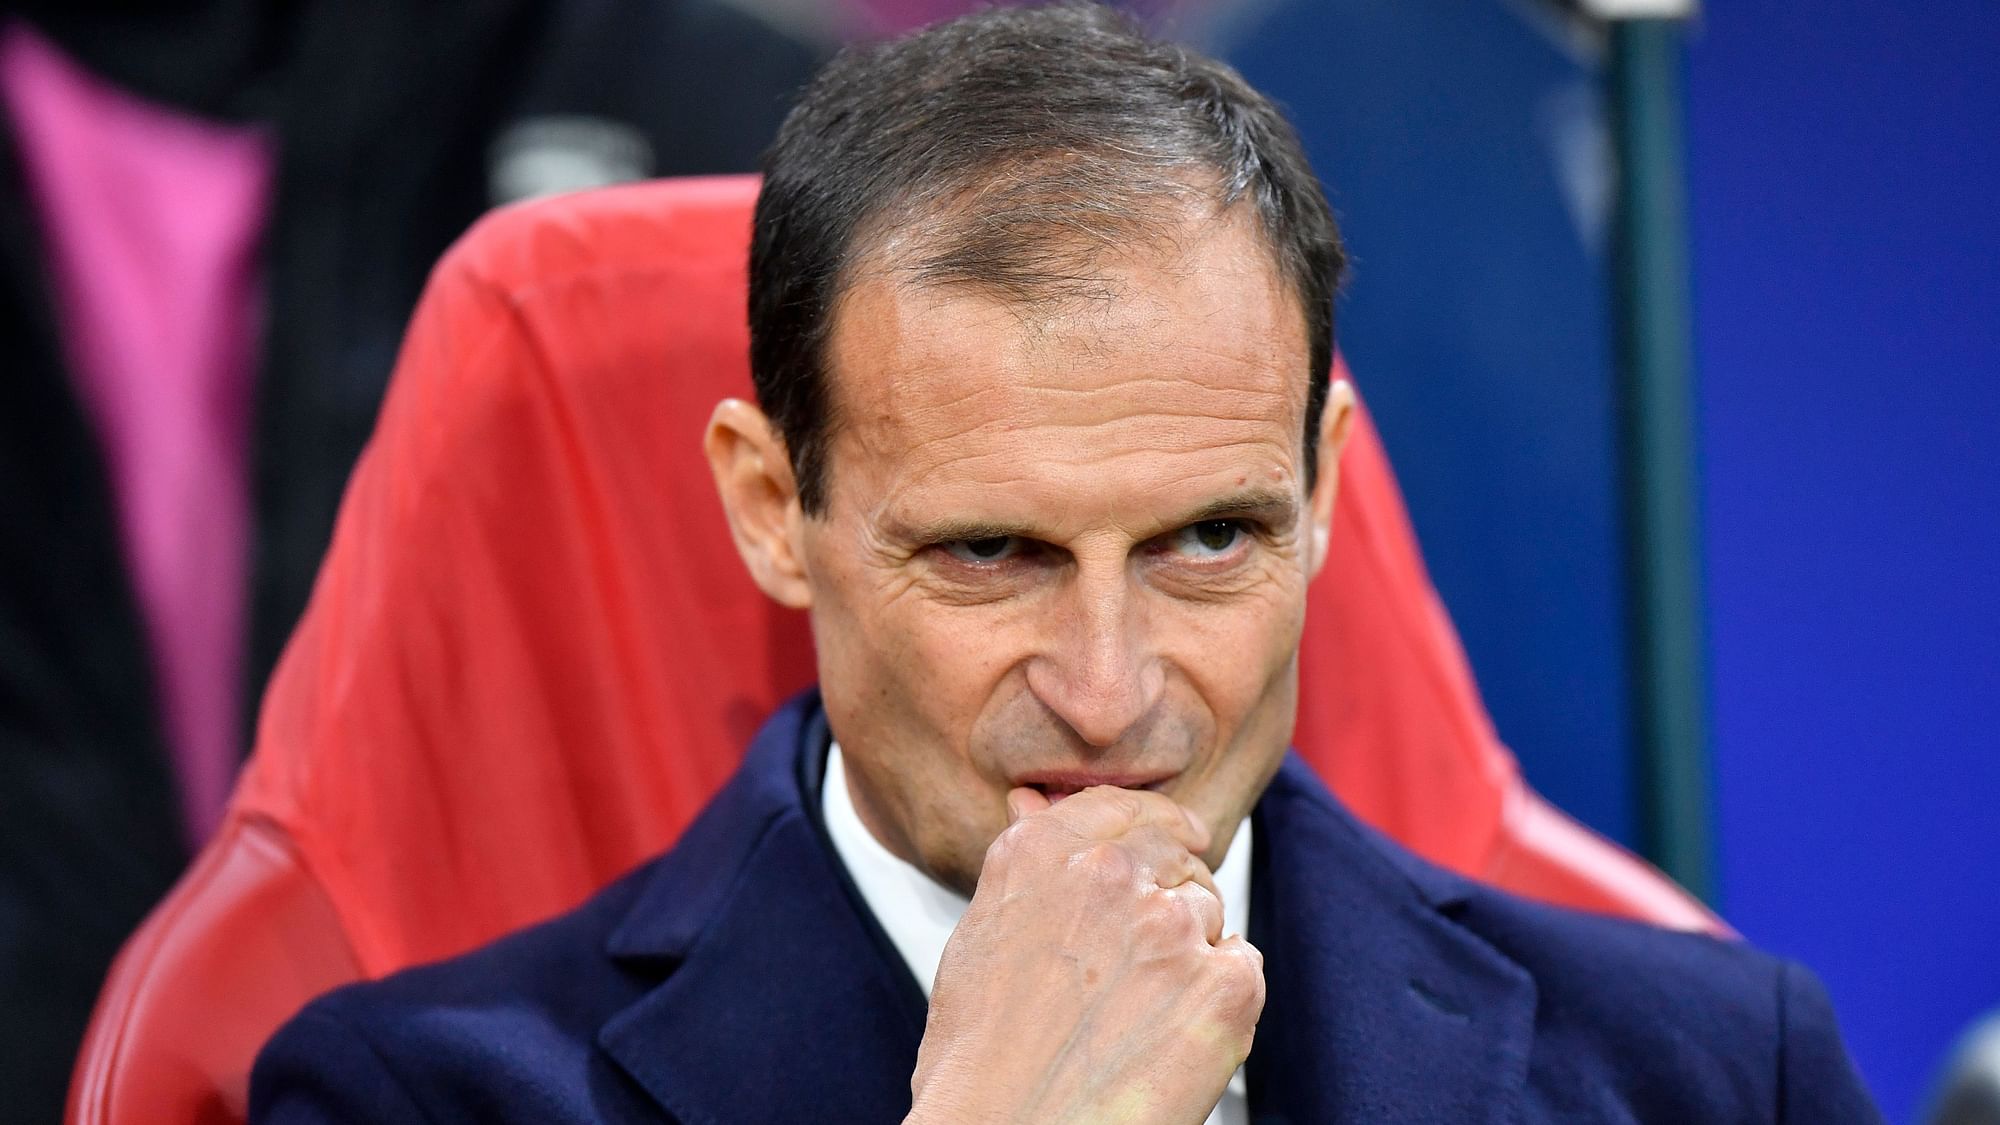 Massimiliano Allegri has been in charge of Juventus for the last five seasons. He led the team to two Champions League finals.